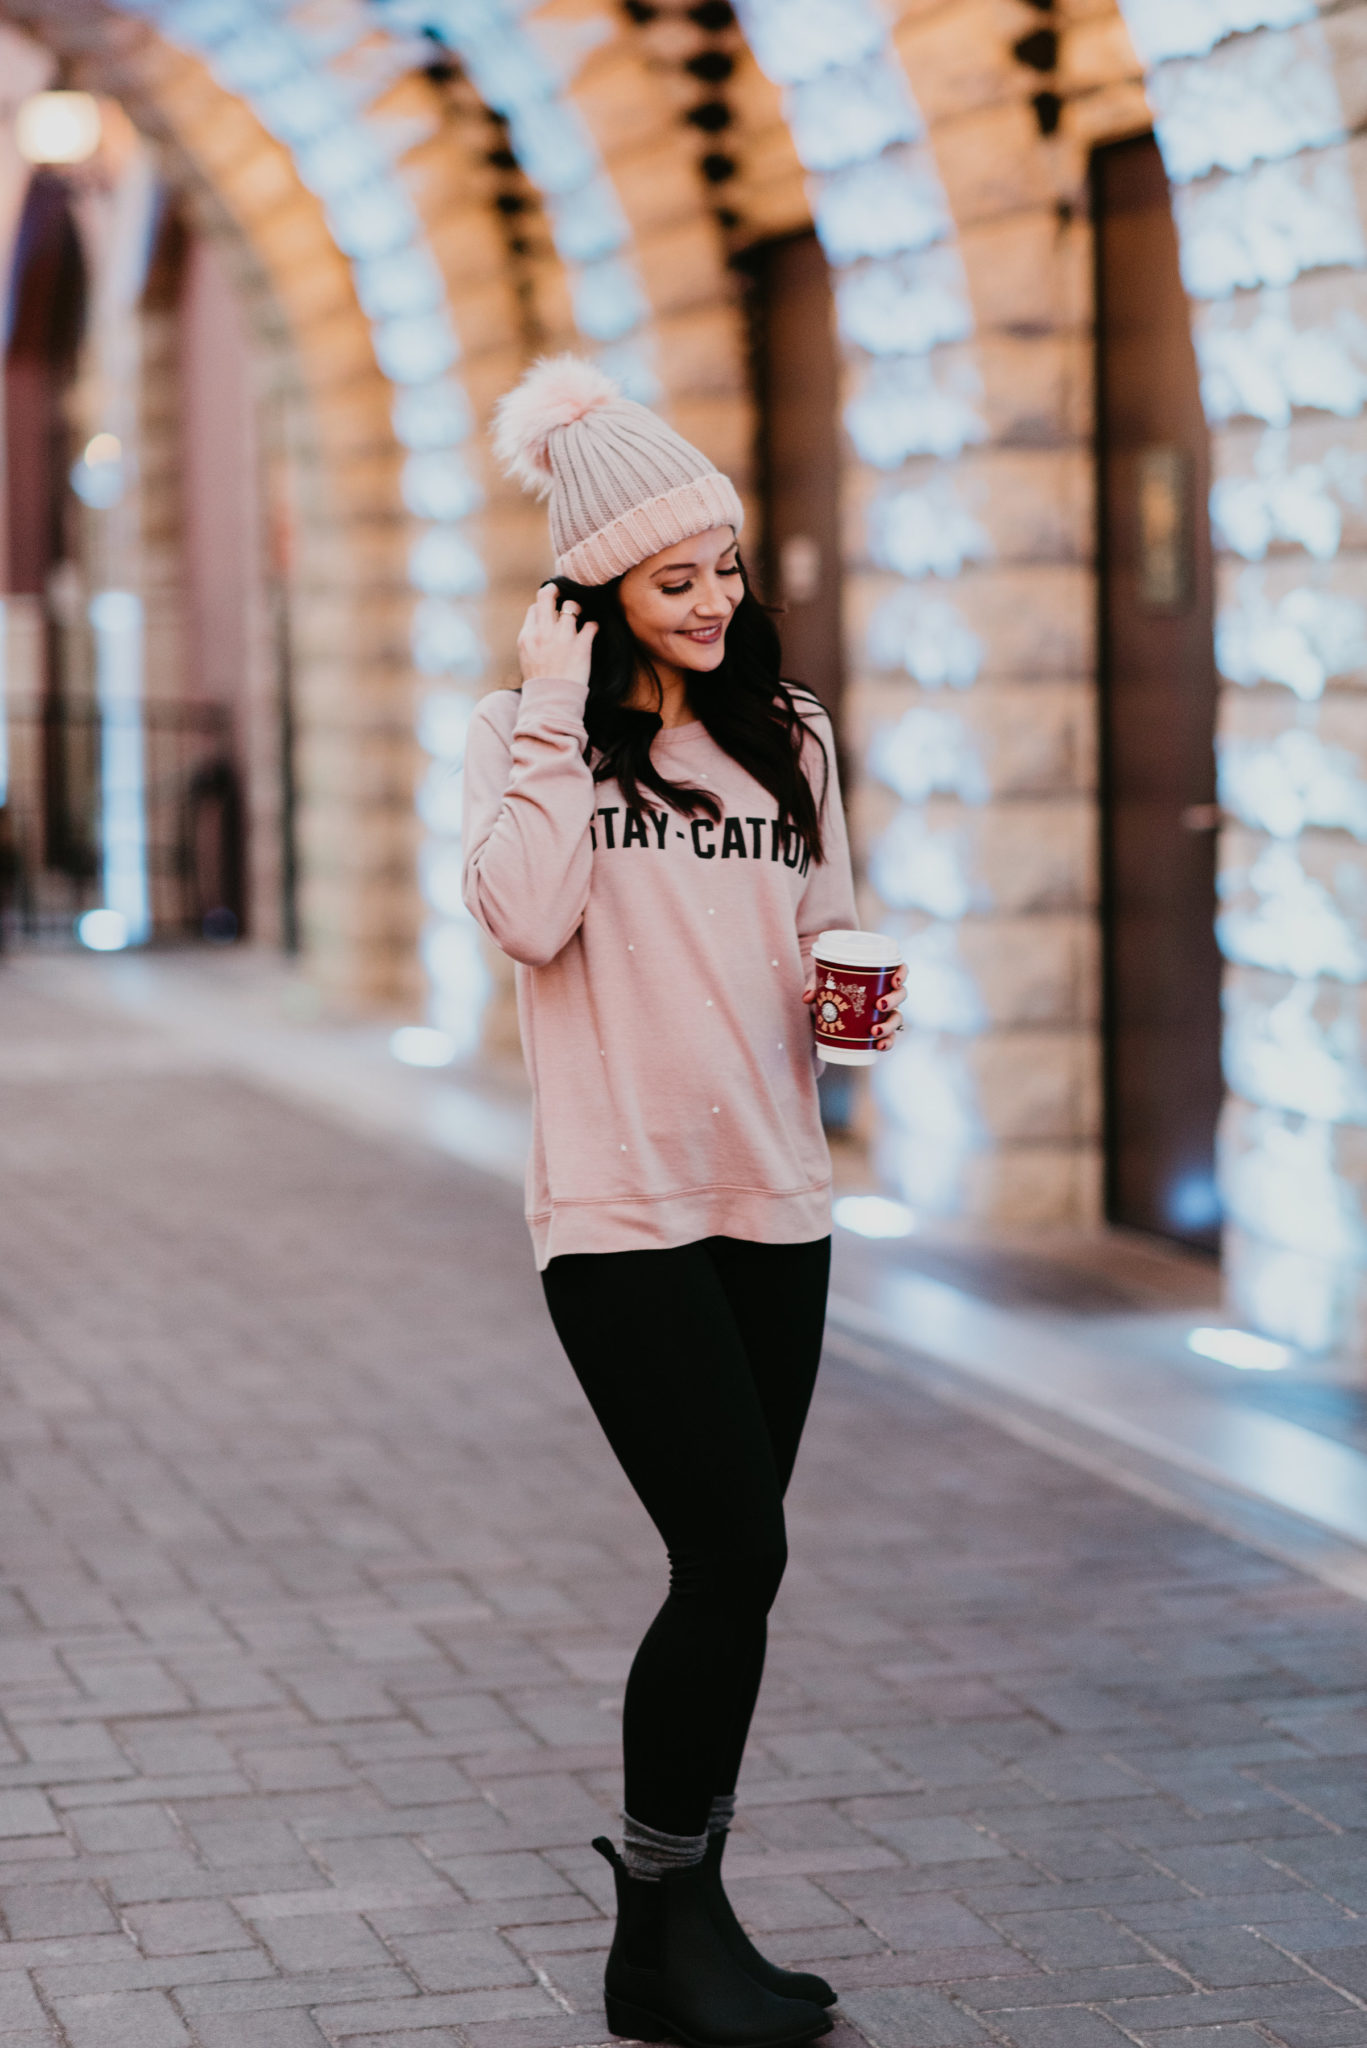 cozy winter outfit rain booties black leggings pink sweatshirt and pink beanie plus a list of 15 ways to treat yourself - 15 Ways to Treat Yourself by popular Las Vegas style blogger Outfits & Outings